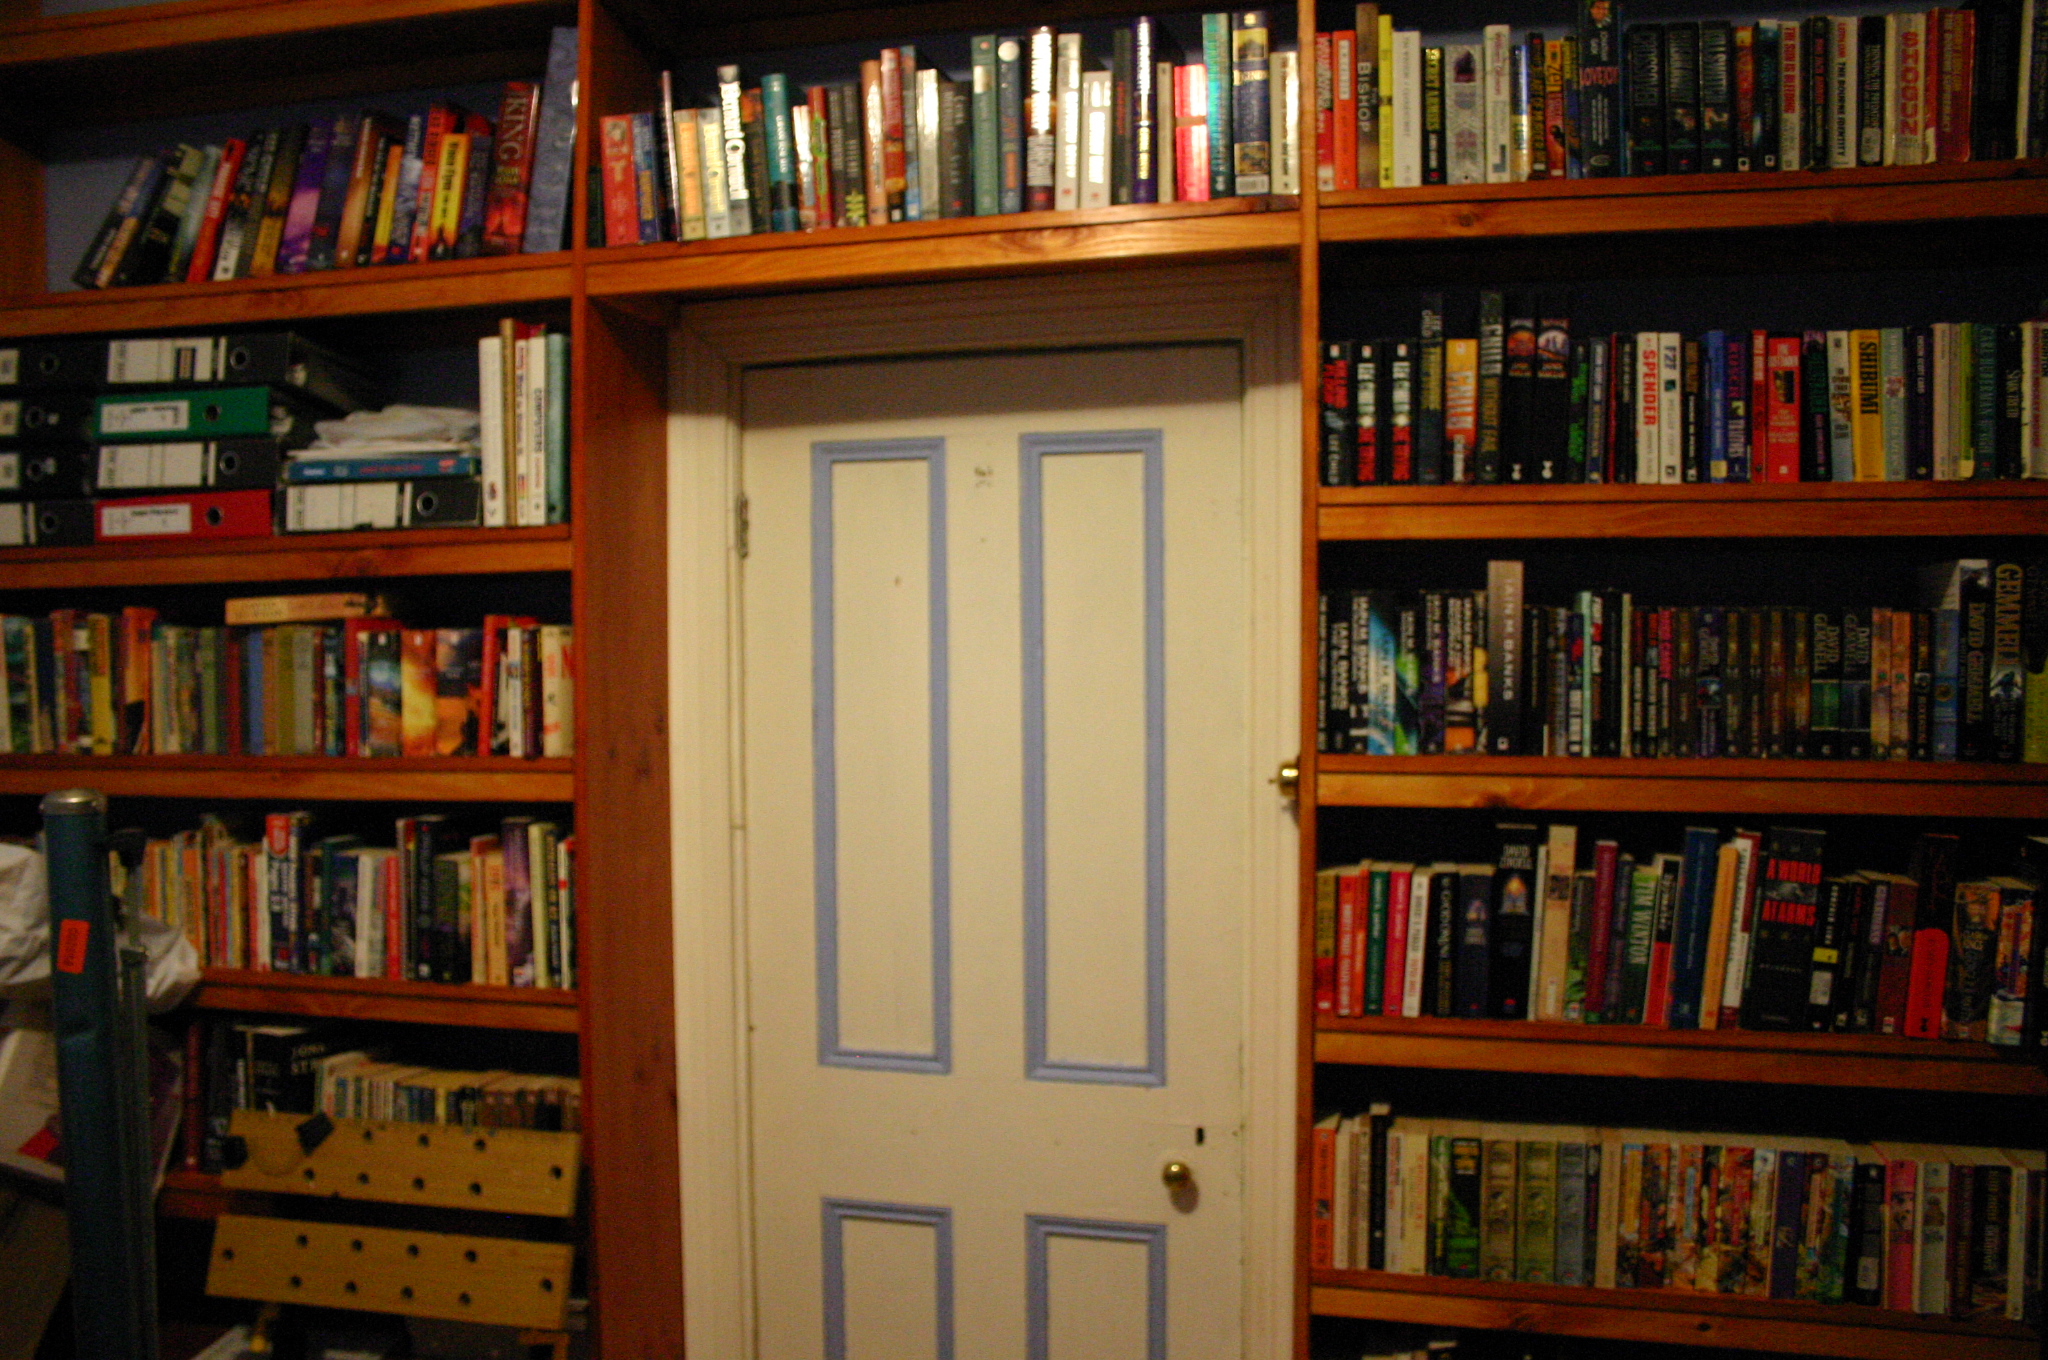 a bookshelf with several books in it is shown